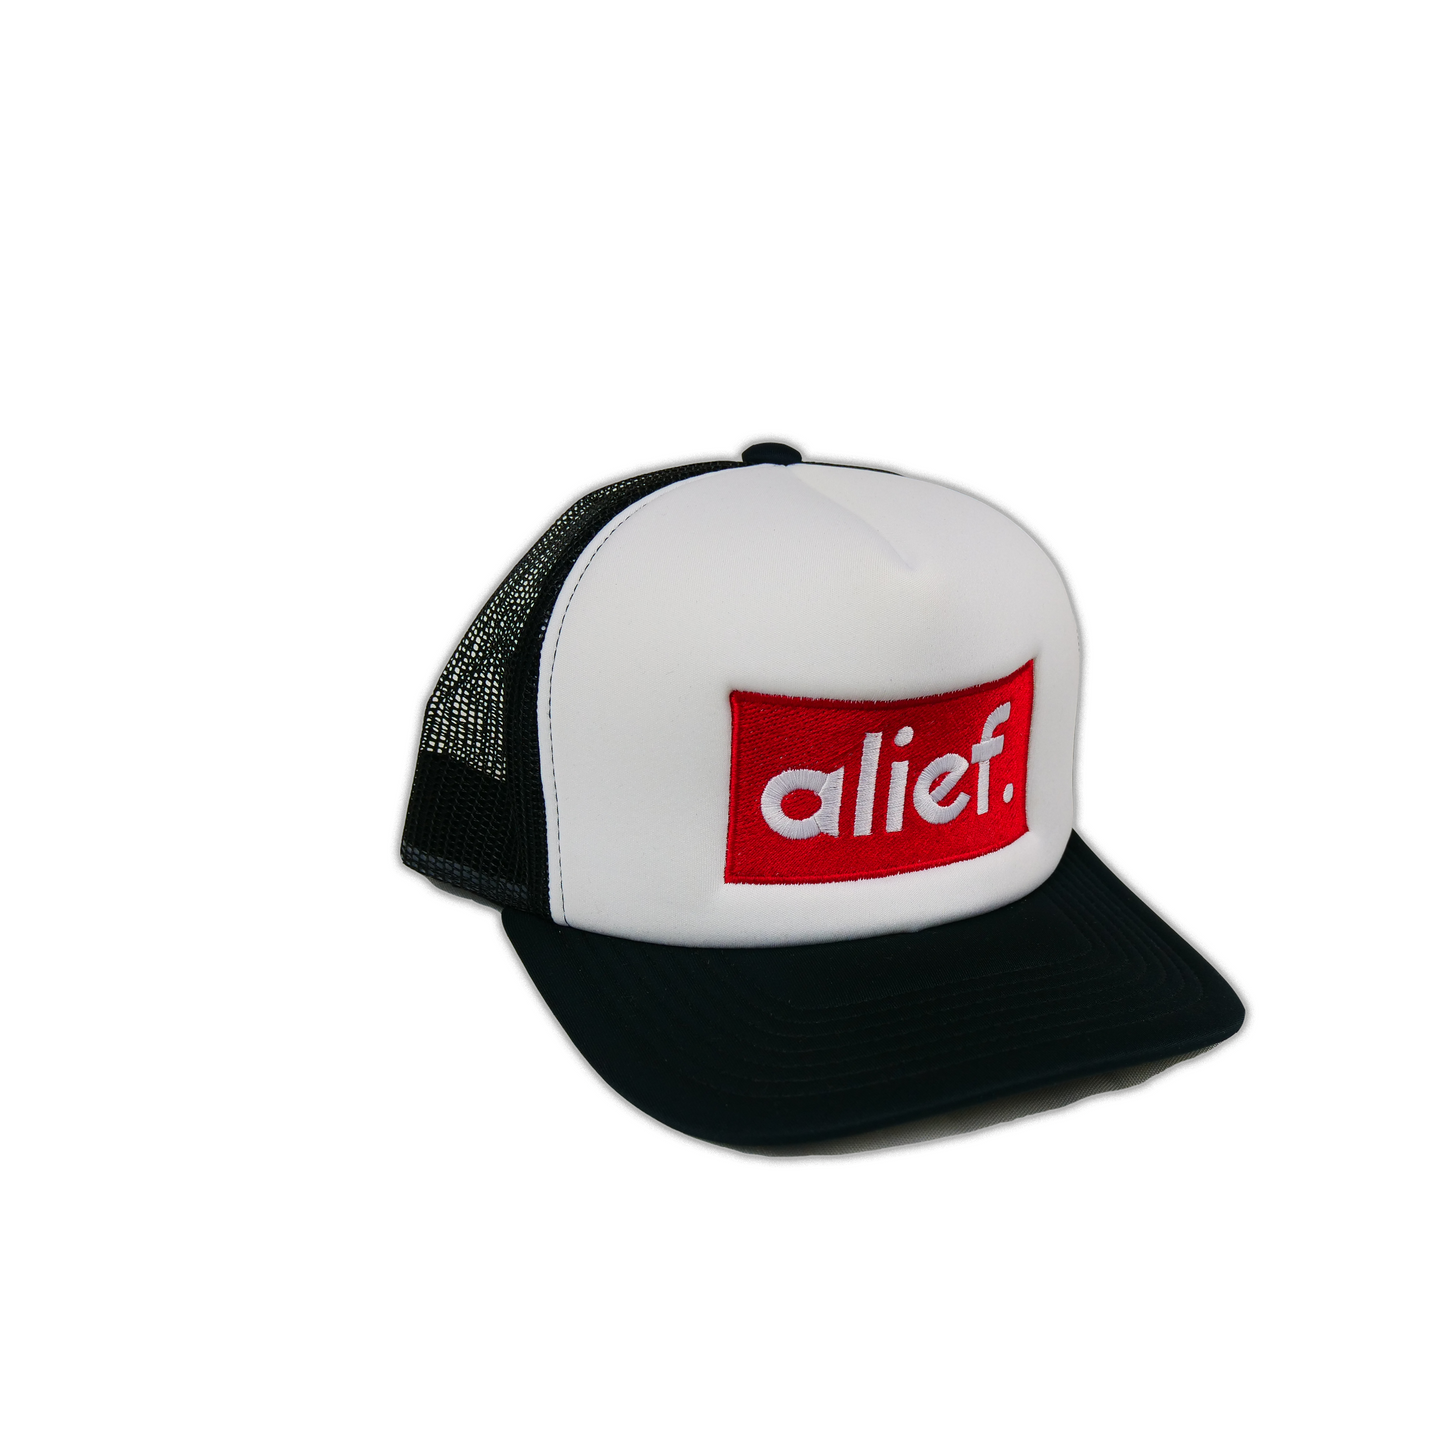 Alief Red Box Trucker Hat - Black and White